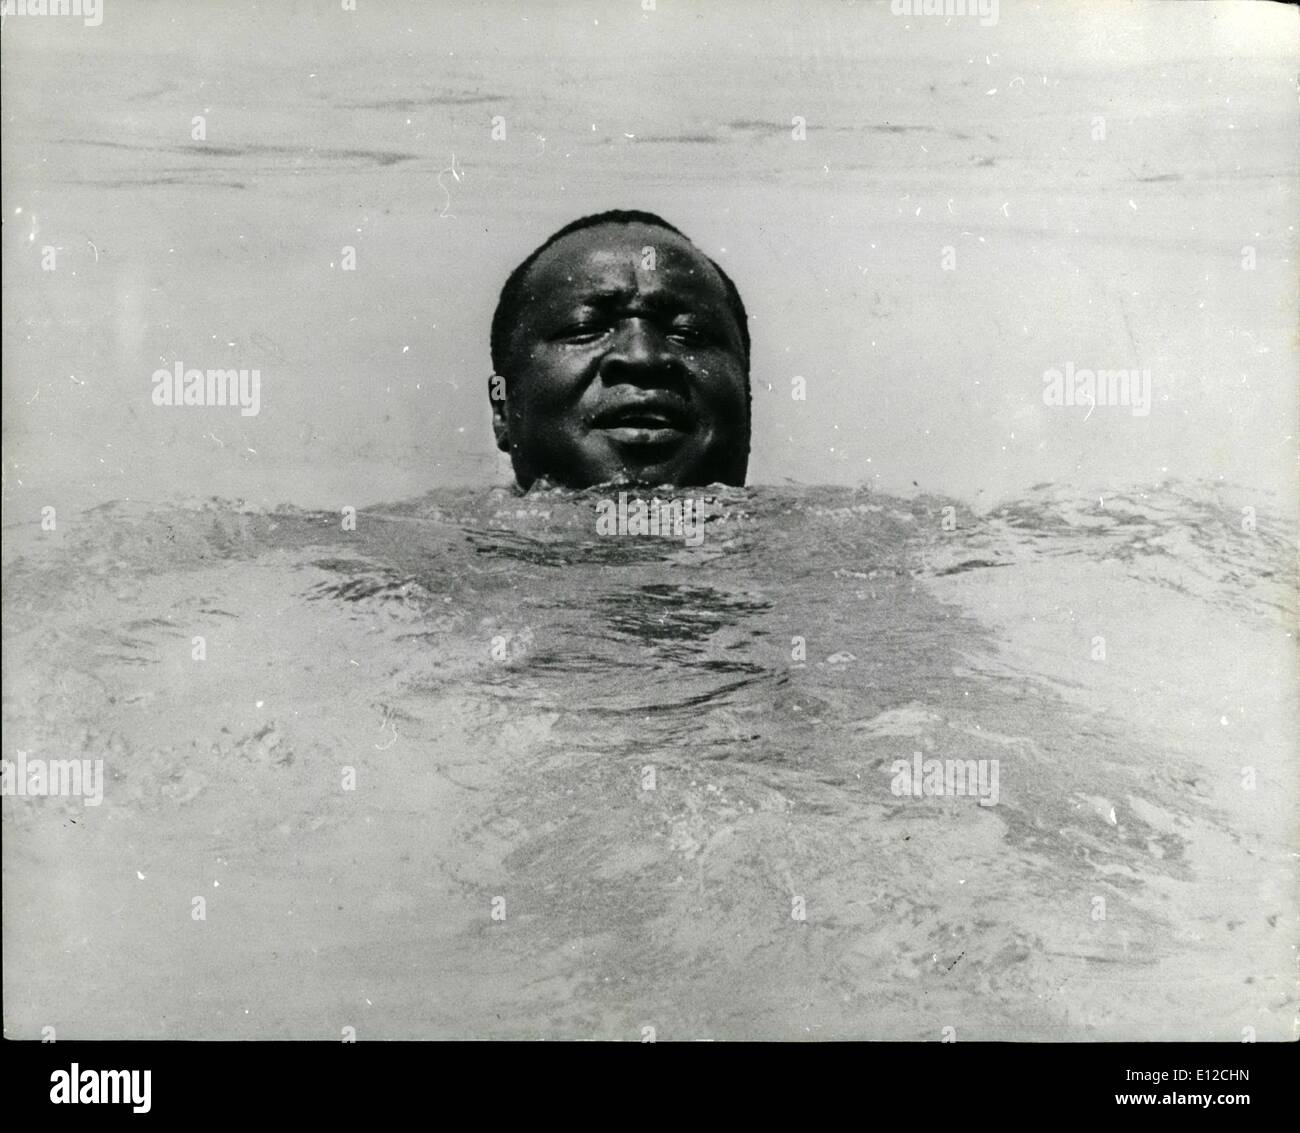 Dec. 12, 2011 - Amin Keeps In The Swim: It's difficult to keep President Amin of Uganda out of the news, even when he has no official duties, and when he fancies a swim he makes shore their are photographers around to keep him in the news. Photo shows head of Idi Amin in water Jaws Is The Warmest, Tenderest, Lovingest Movie Of They Year. I Give It Four Coconuts. Stock Photo